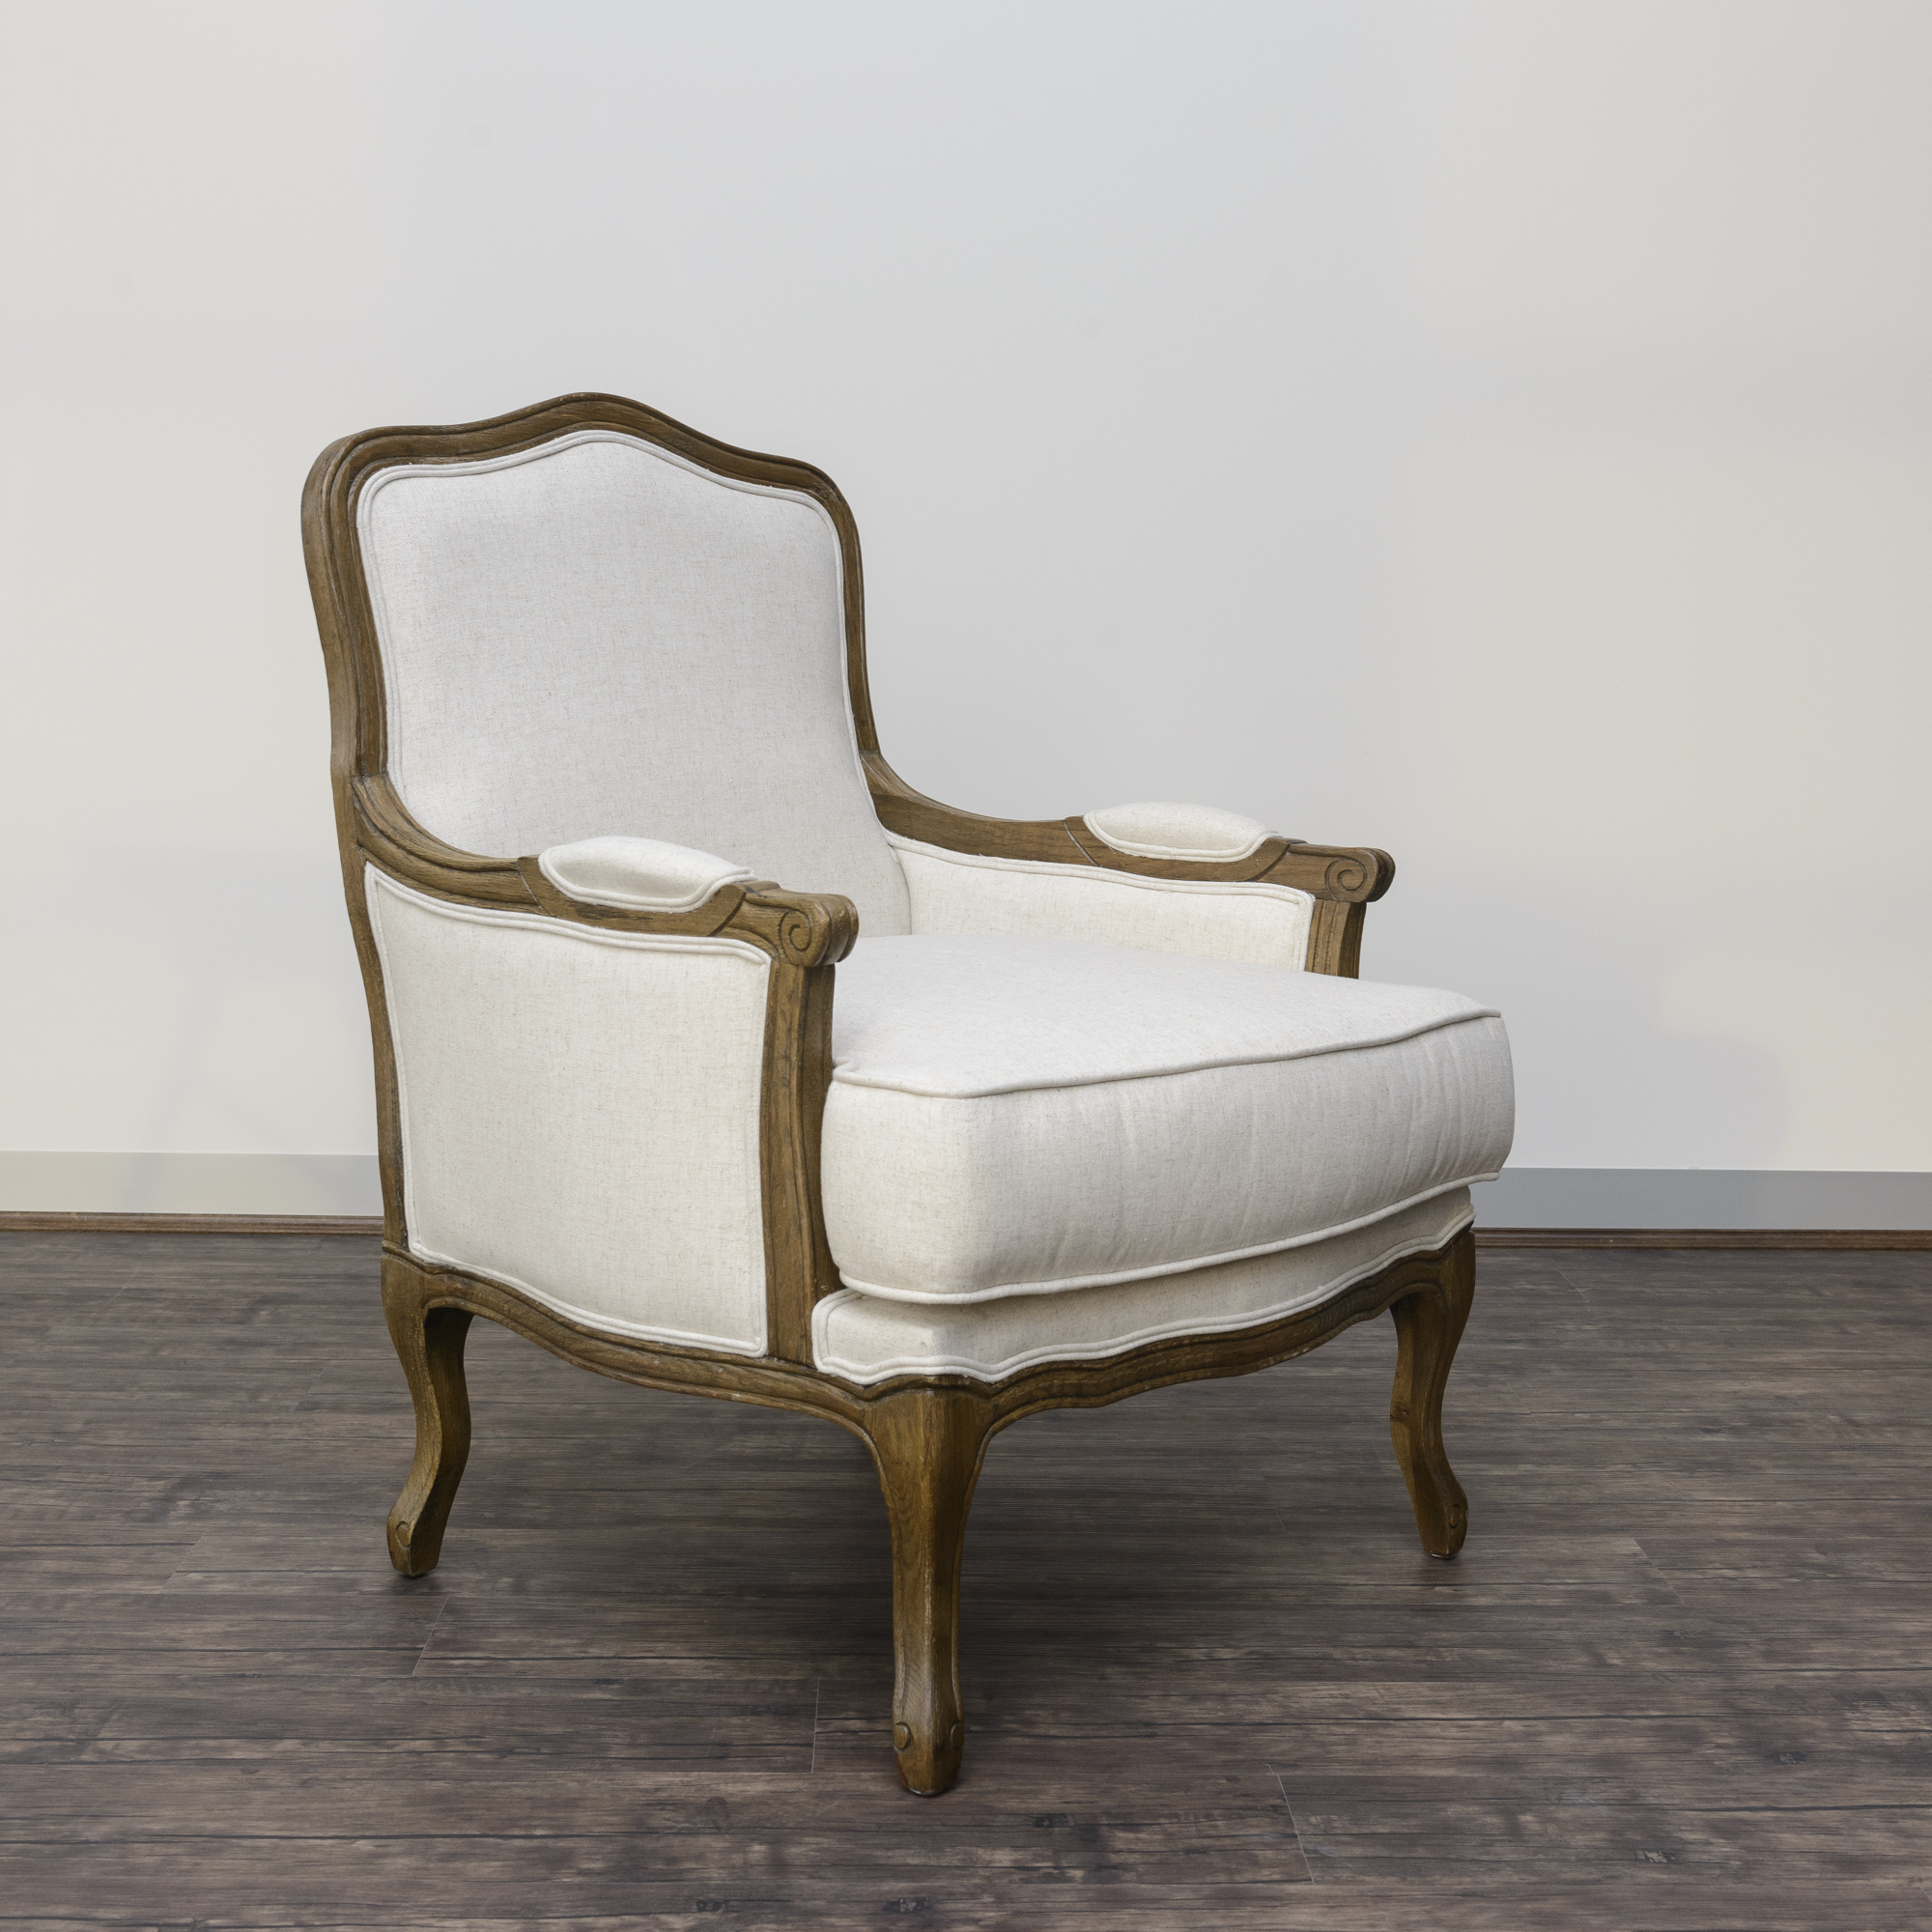 Accent chair “Ludwig” in Cream Linen-Blend Fabric